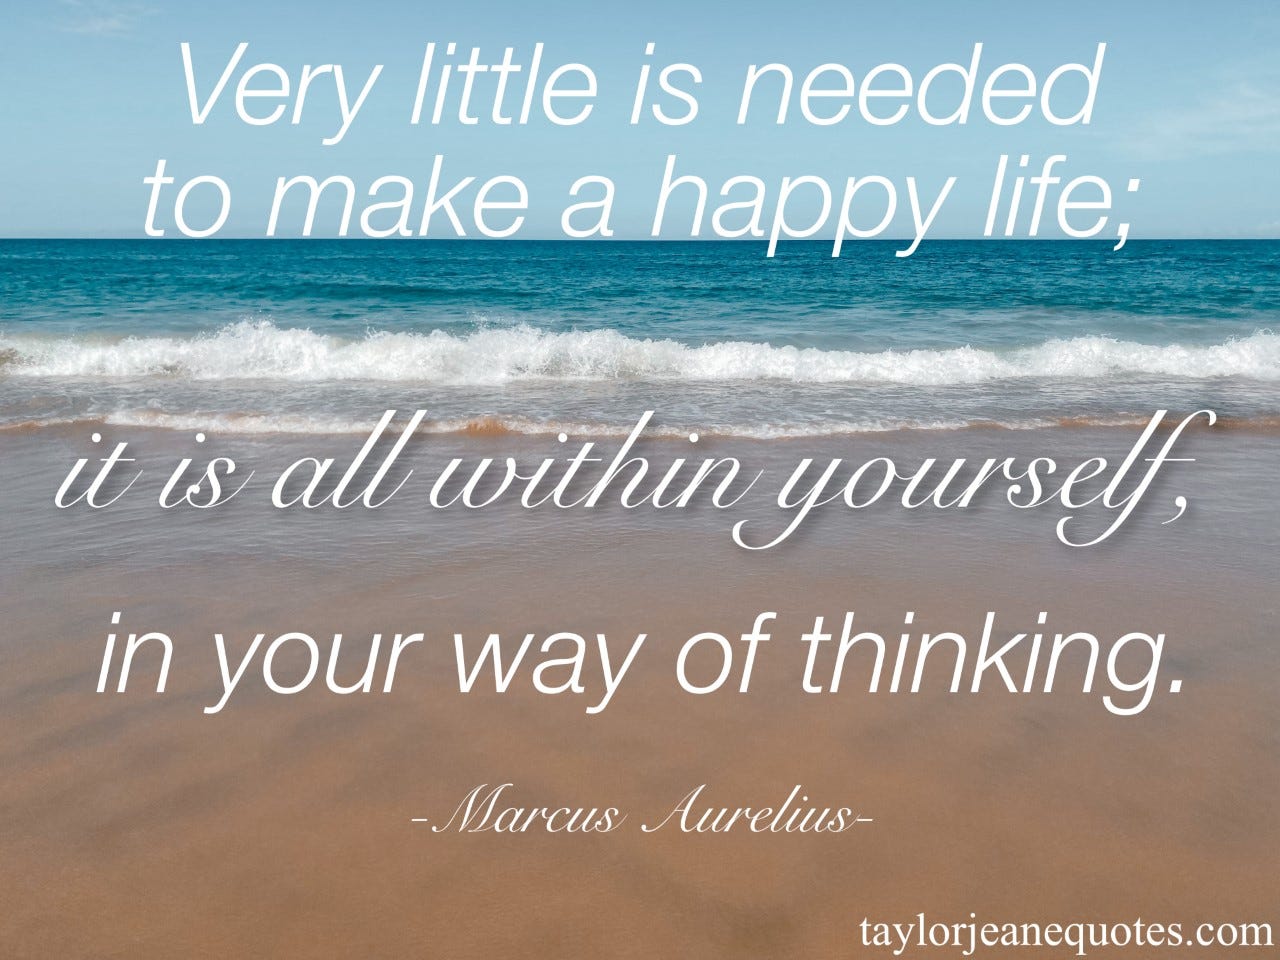 taylor jeane quotes, quote of the day, motivational quotes, inspirational quotes, positive quotes, think positively quotes, positive thinking, positive thinking quotes, uplifting quotes, quotes, marcus aurelius quotes, marcus aurelius, happiness, happiness quotes, happy quotes, be happy quotes